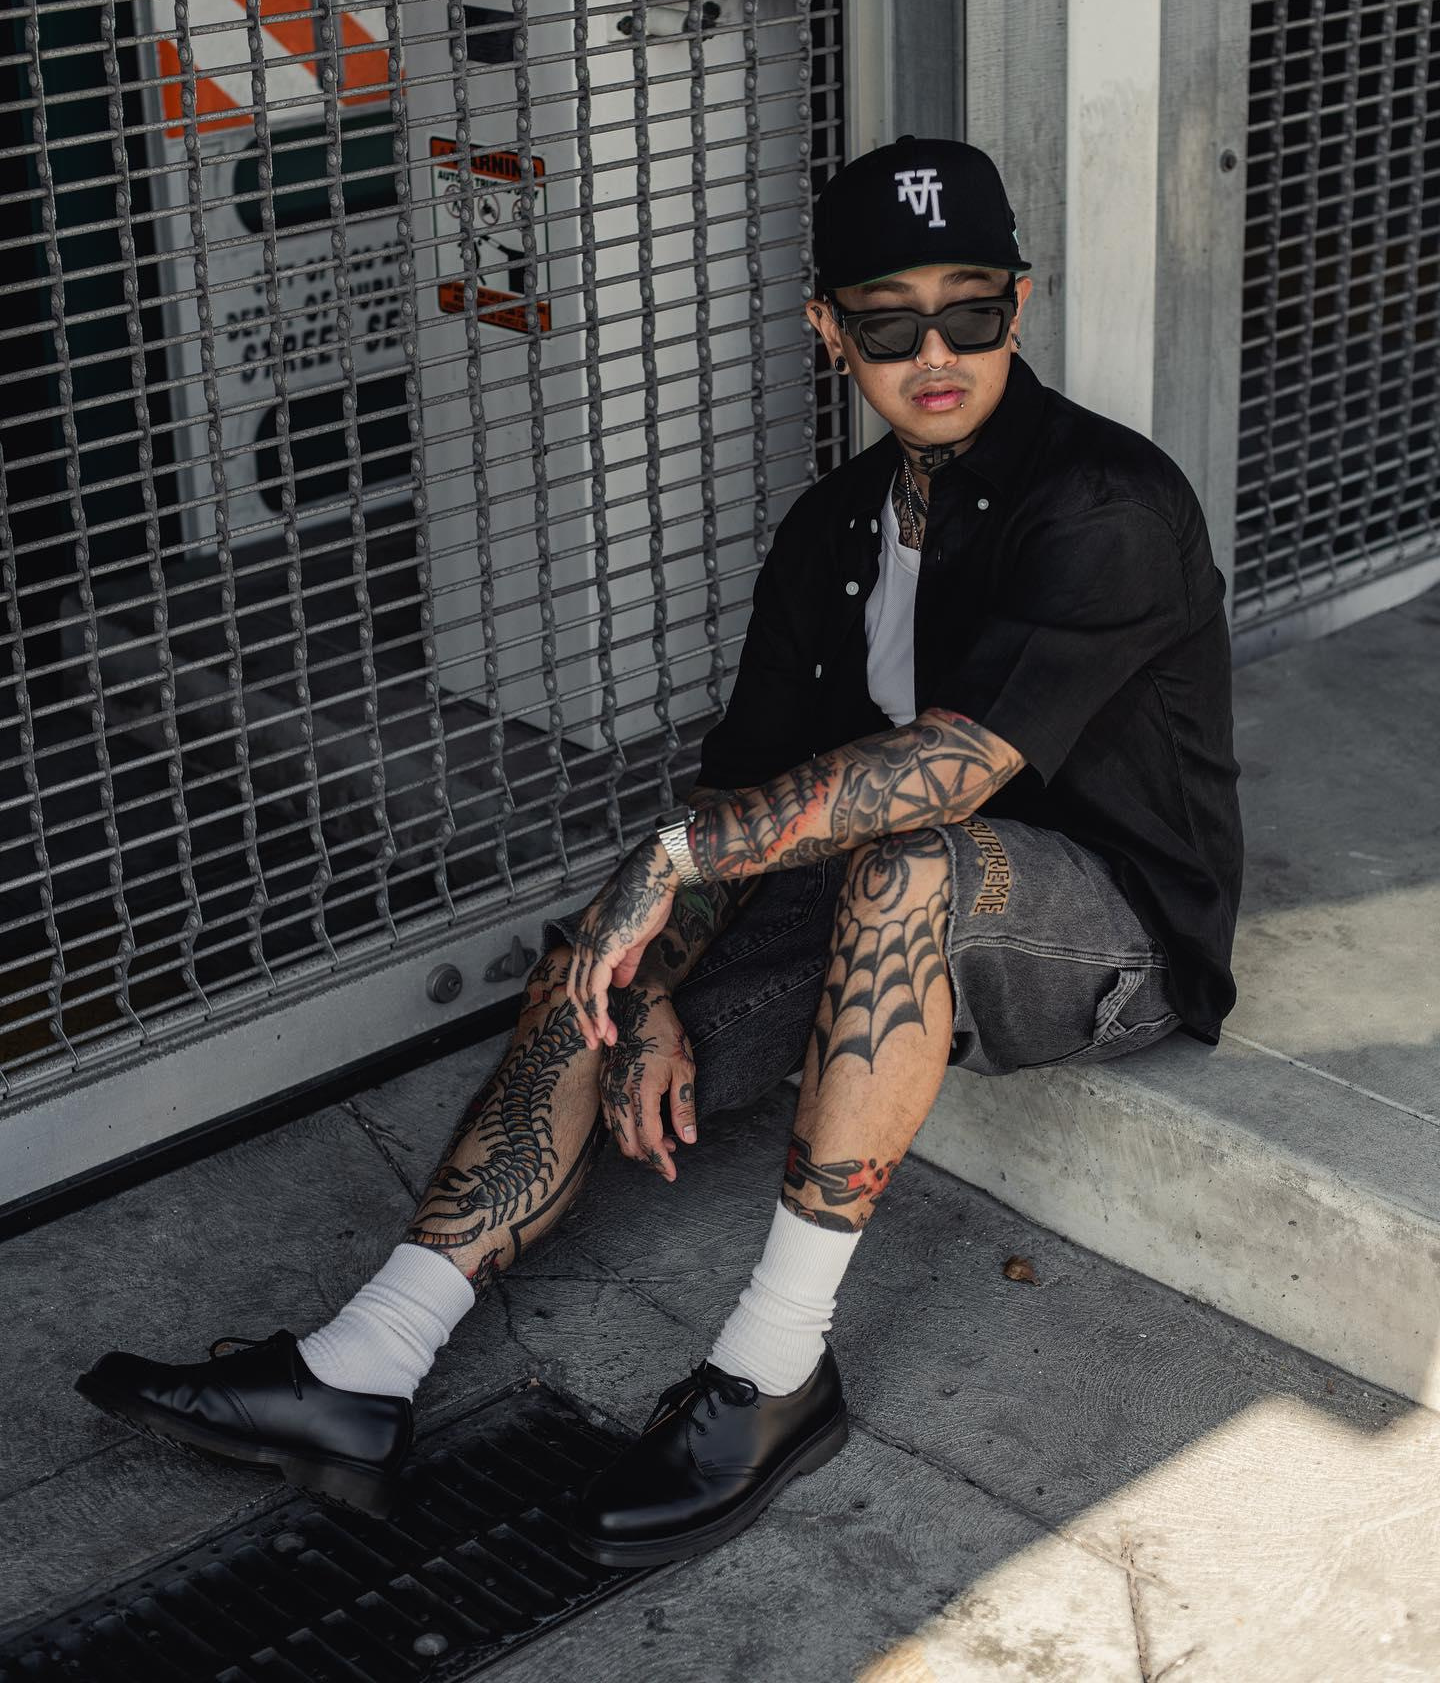 Man with tattoos sitting on the floor, wearing sunglasses and Dr. Martens.